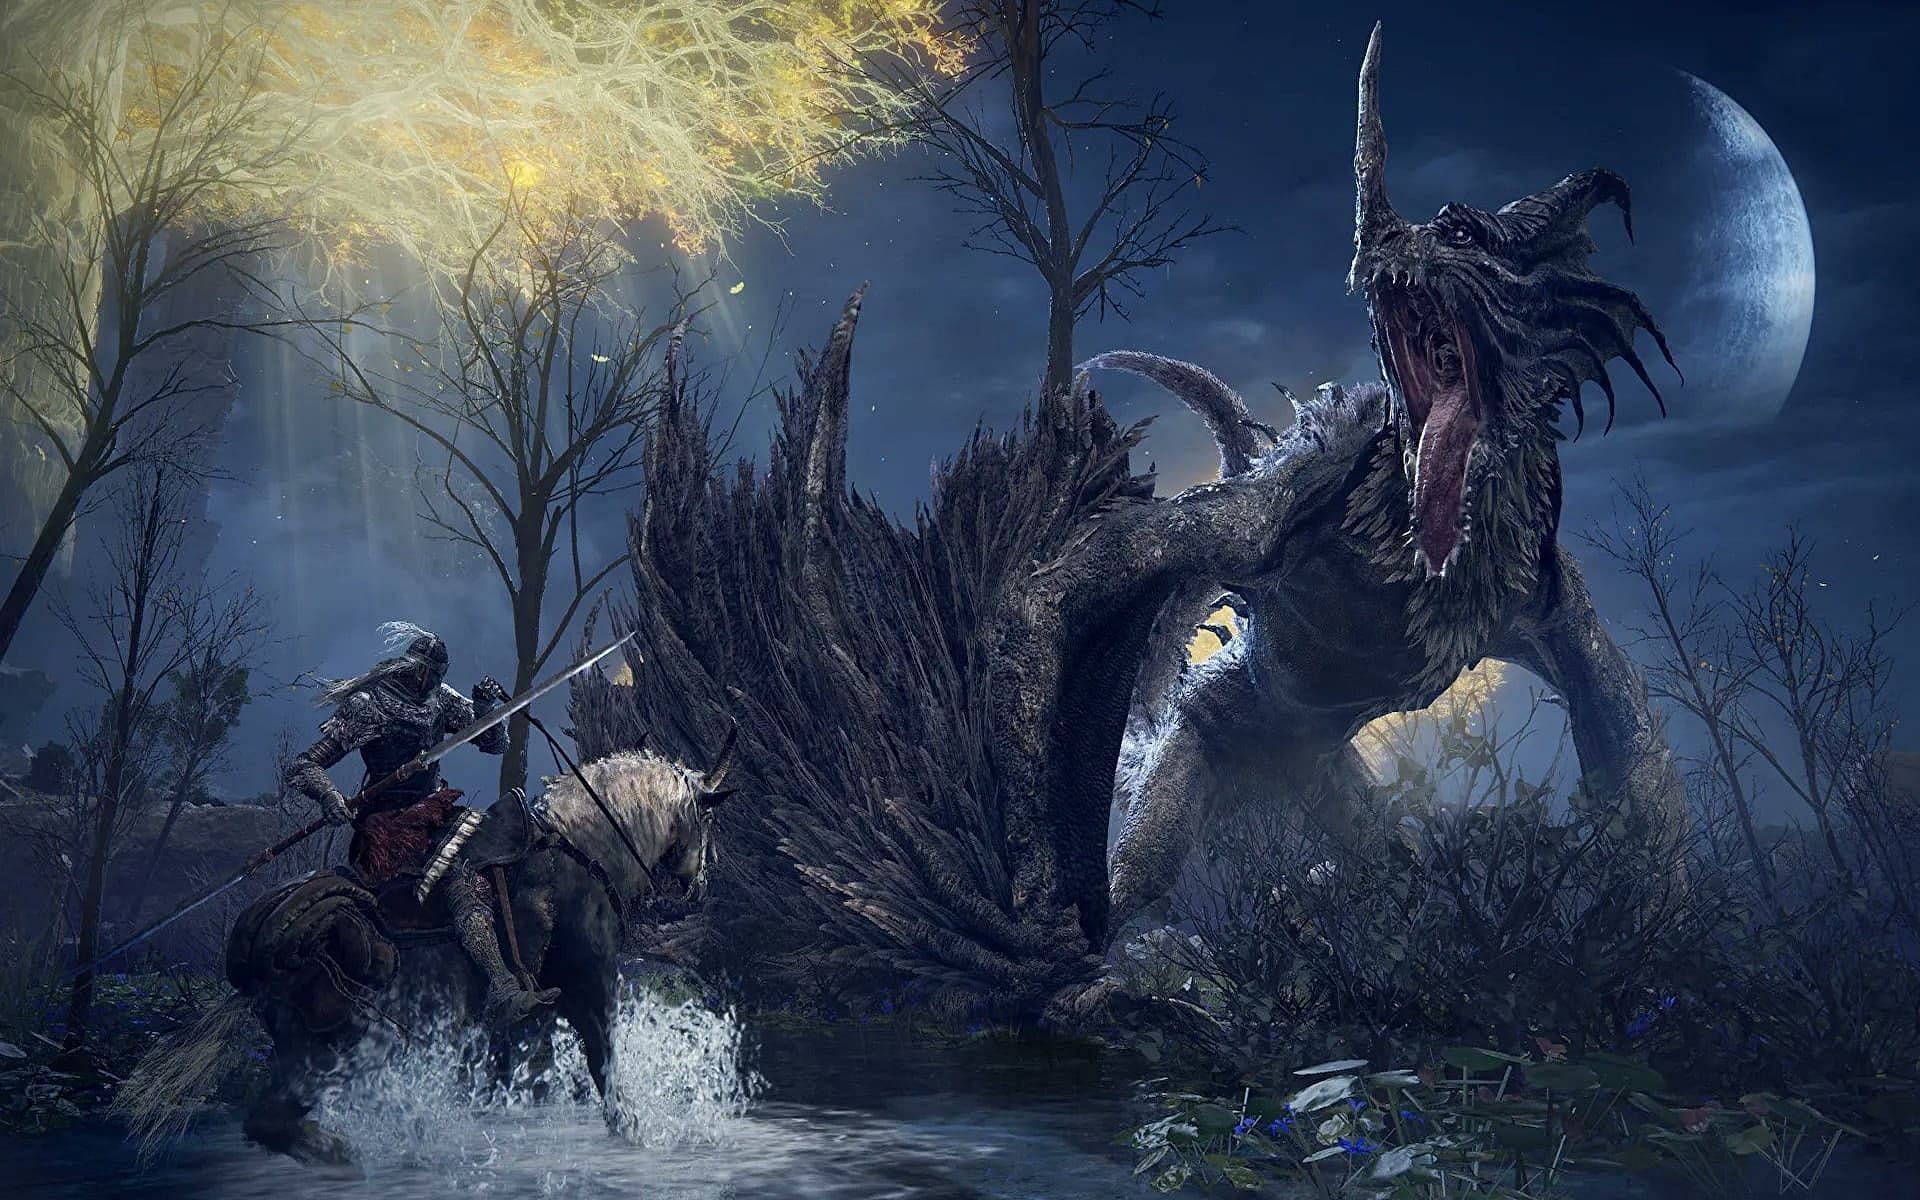 Players are excited to take on a dragon boss in Elden Ring (Image via FromSoftware Inc.)